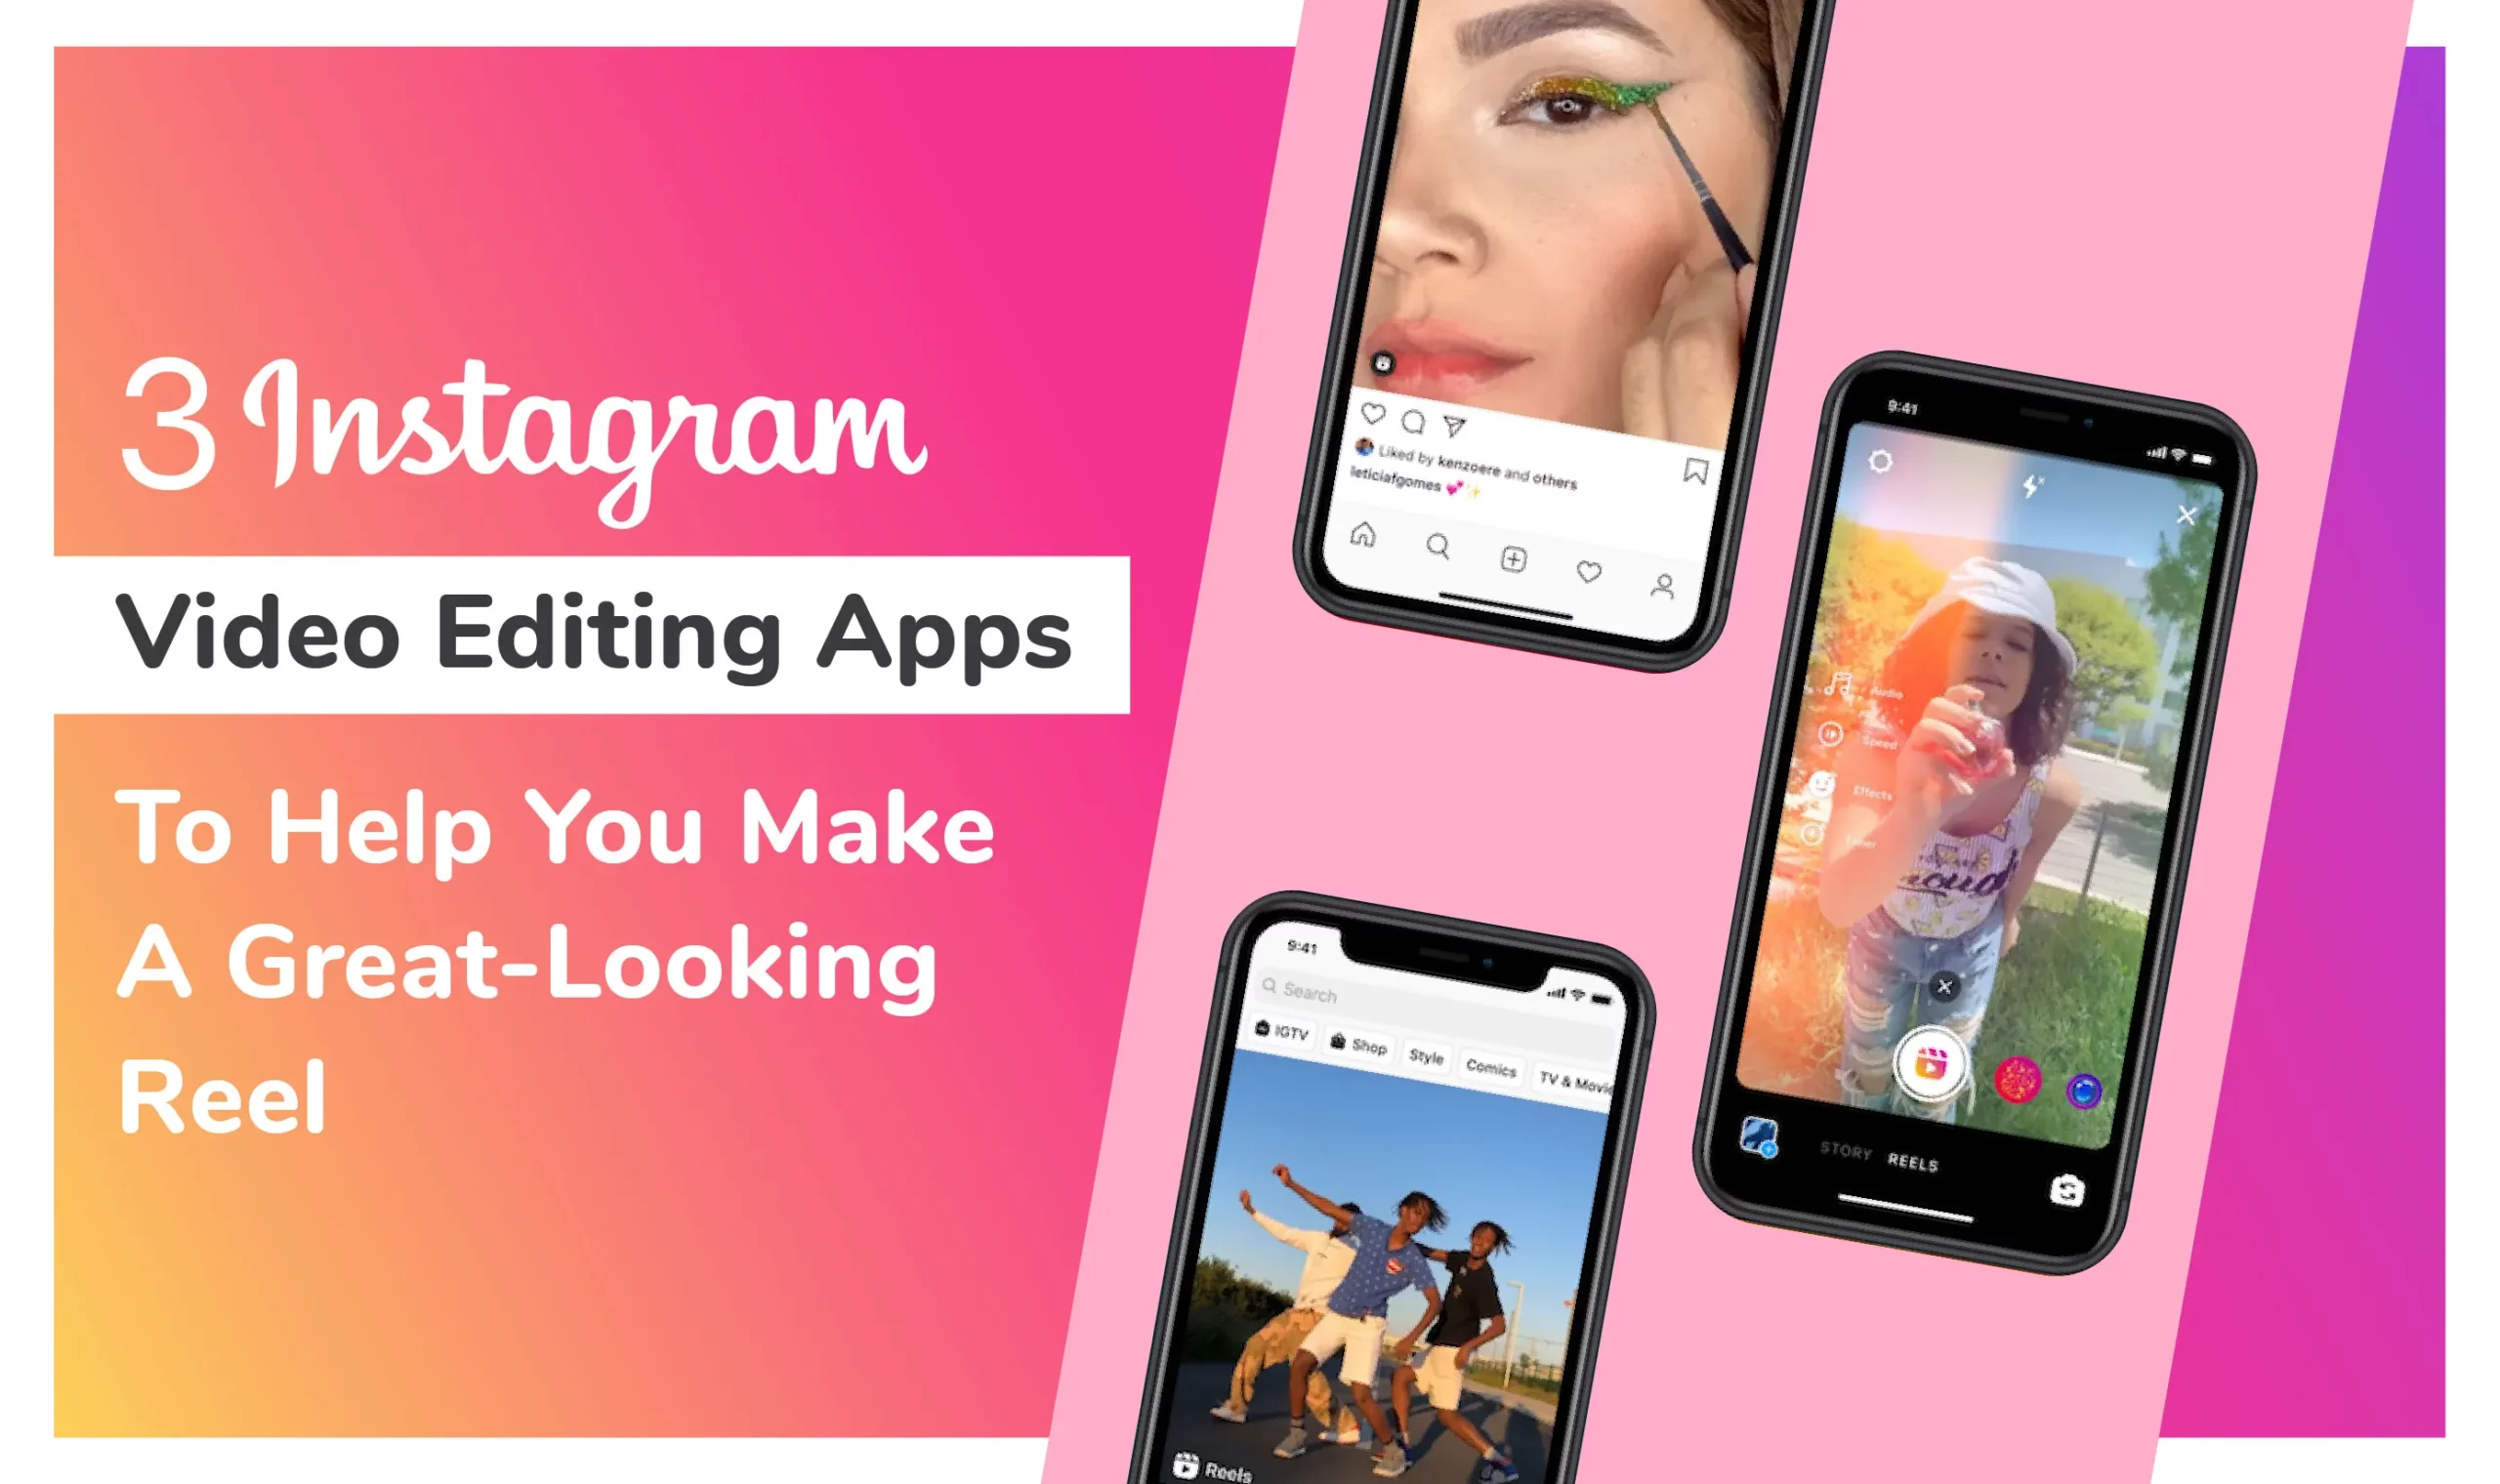 3 Instagram Video Editing Apps To Help You Make A Great-Looking Reel